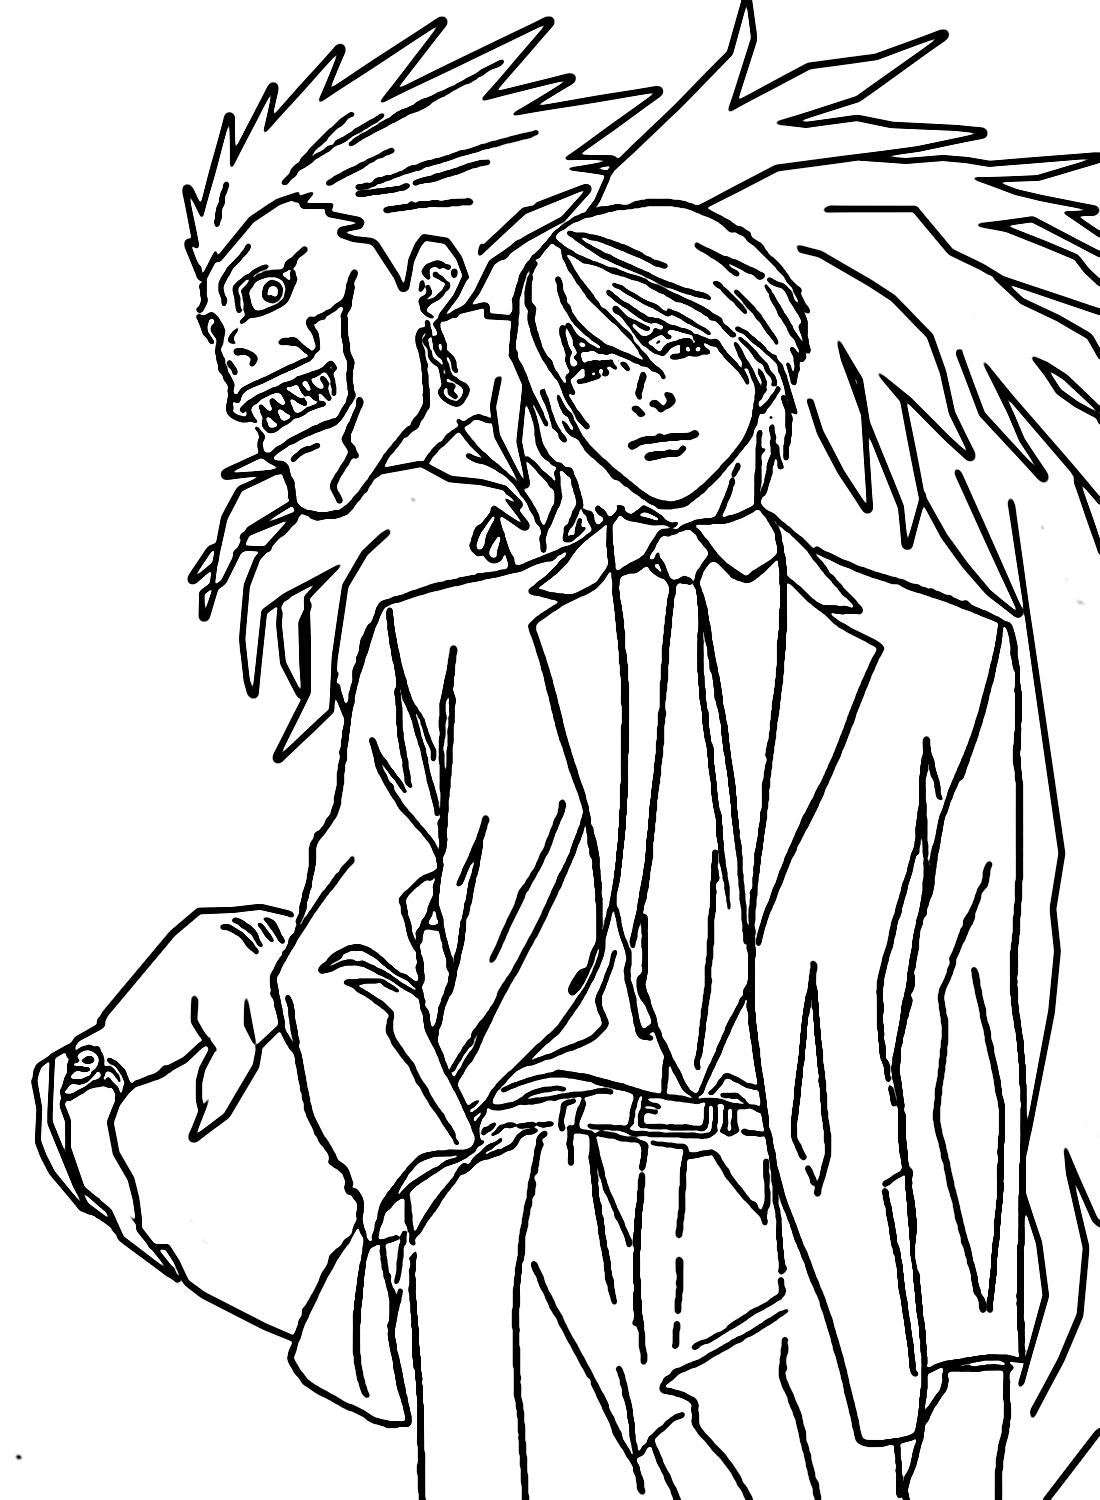 Death Note Yagami Light and Ryuk Coloring Page - Free Printable ...